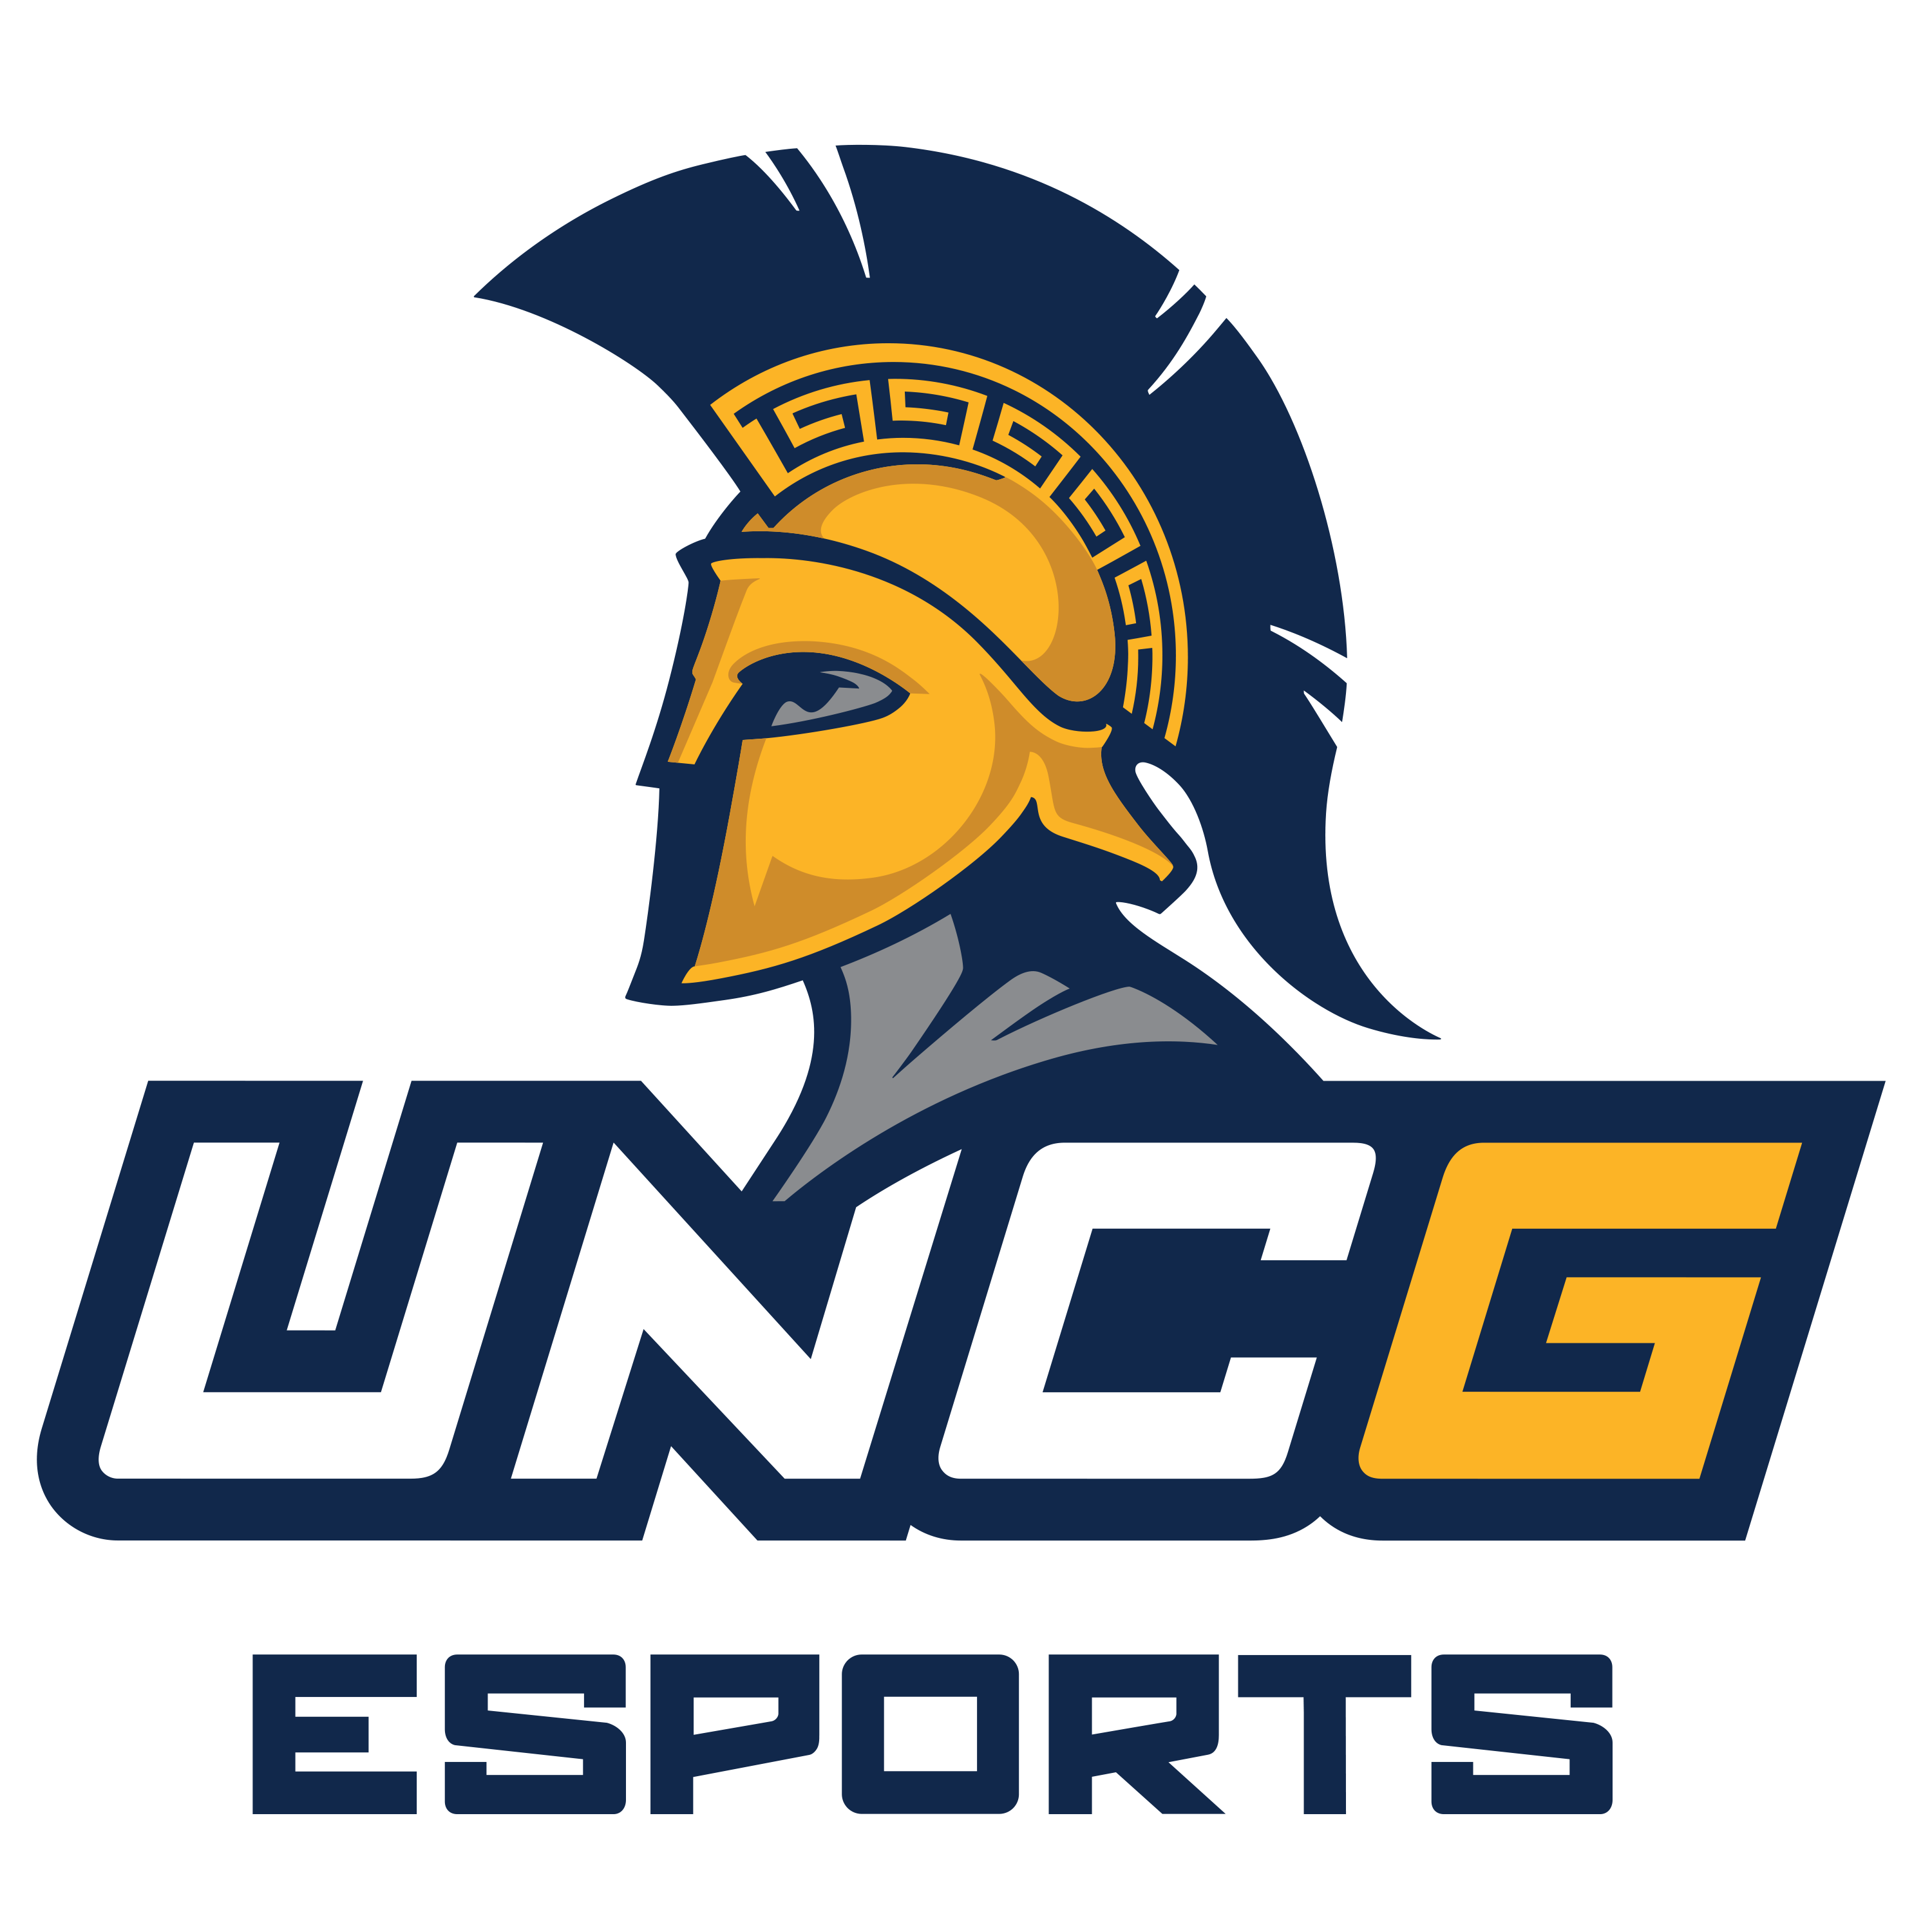 UNCG Esports logo: Where Innovation and research meets gaming